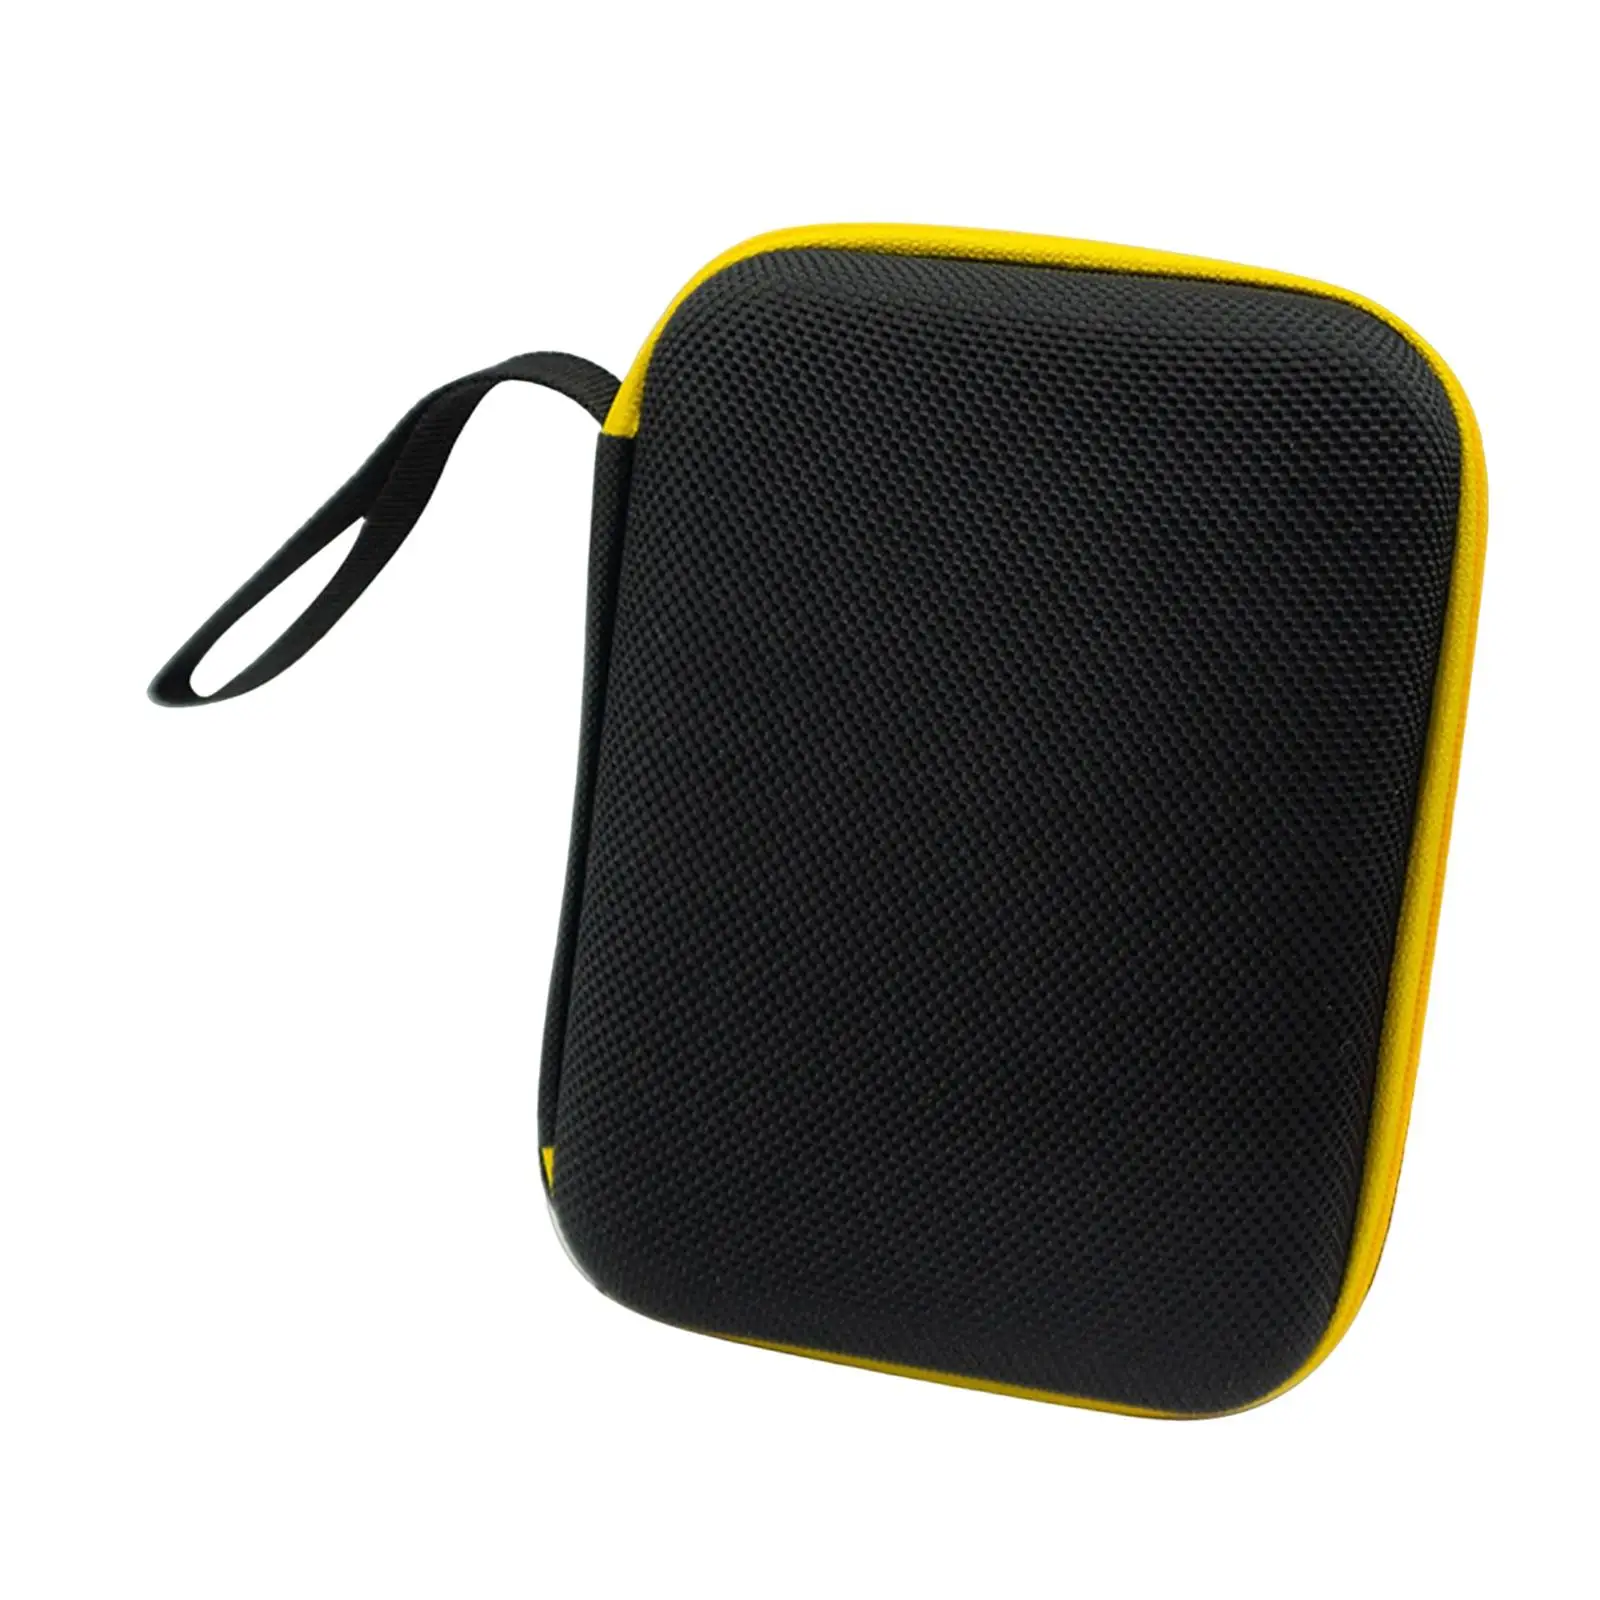 Handheld Game Console Case for Charging Cable Headphones Hard Travel Case Storage Bag Handheld Game Console Carrying Case